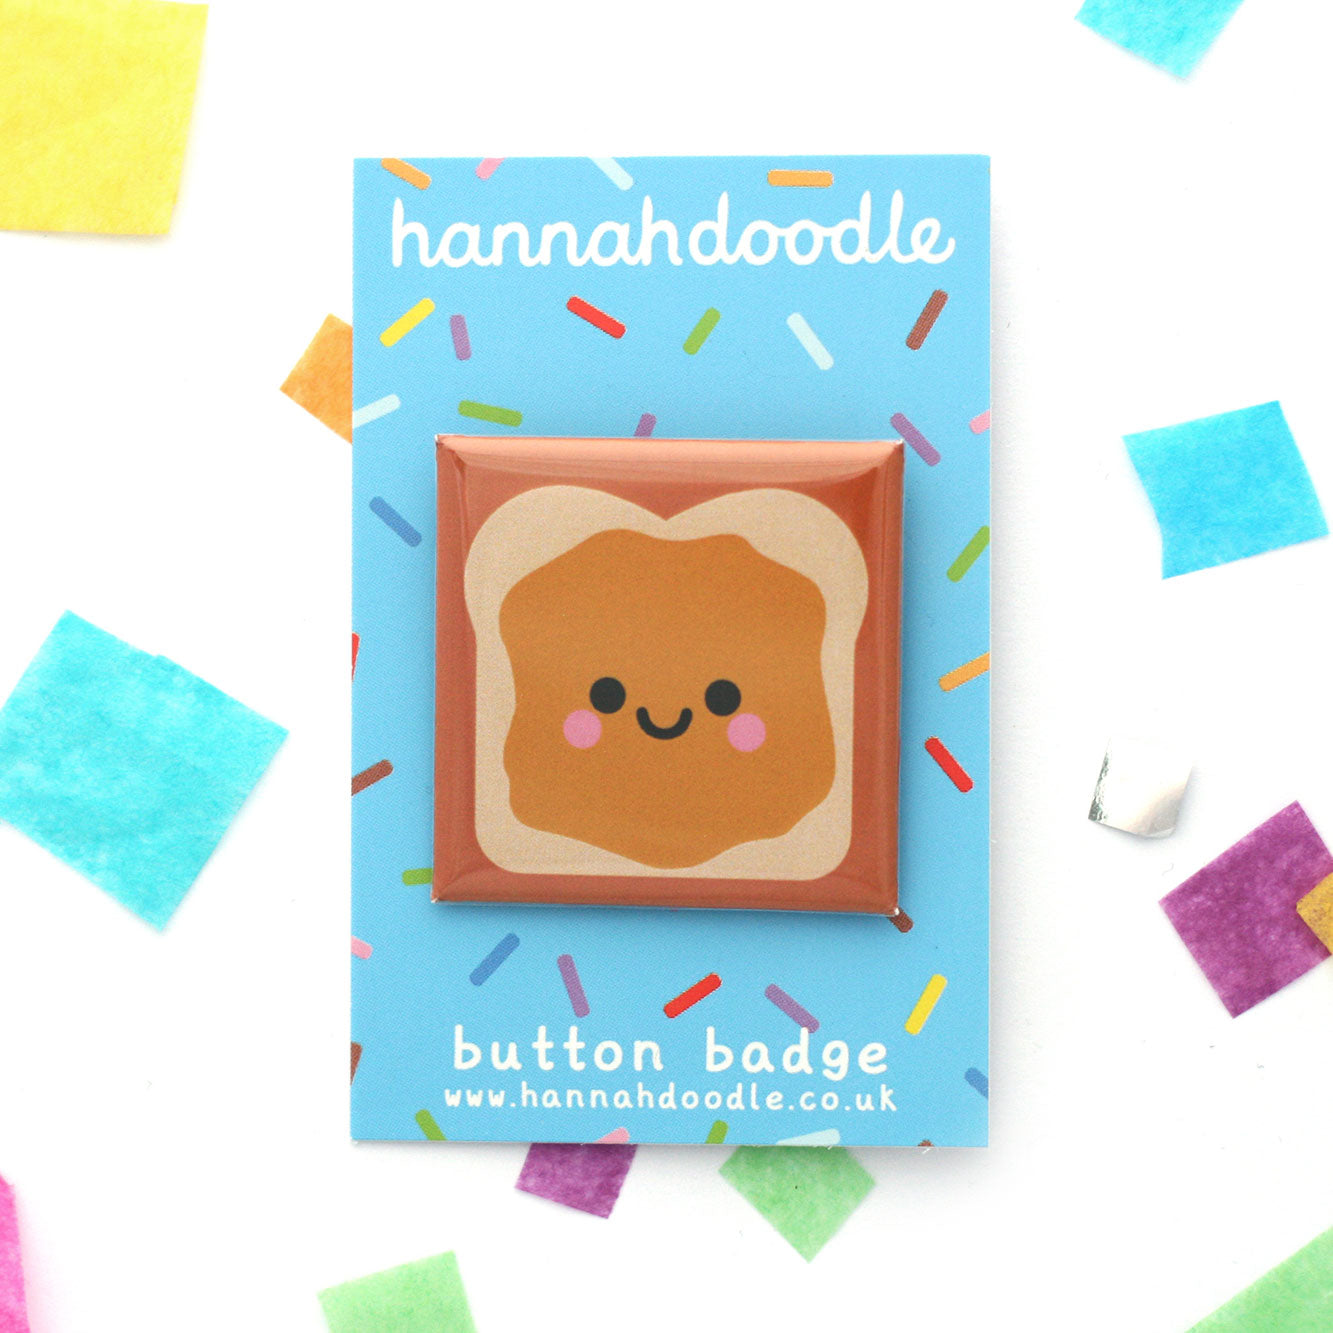 Peanut butter sandwich with smiley face square badge on blue backing card